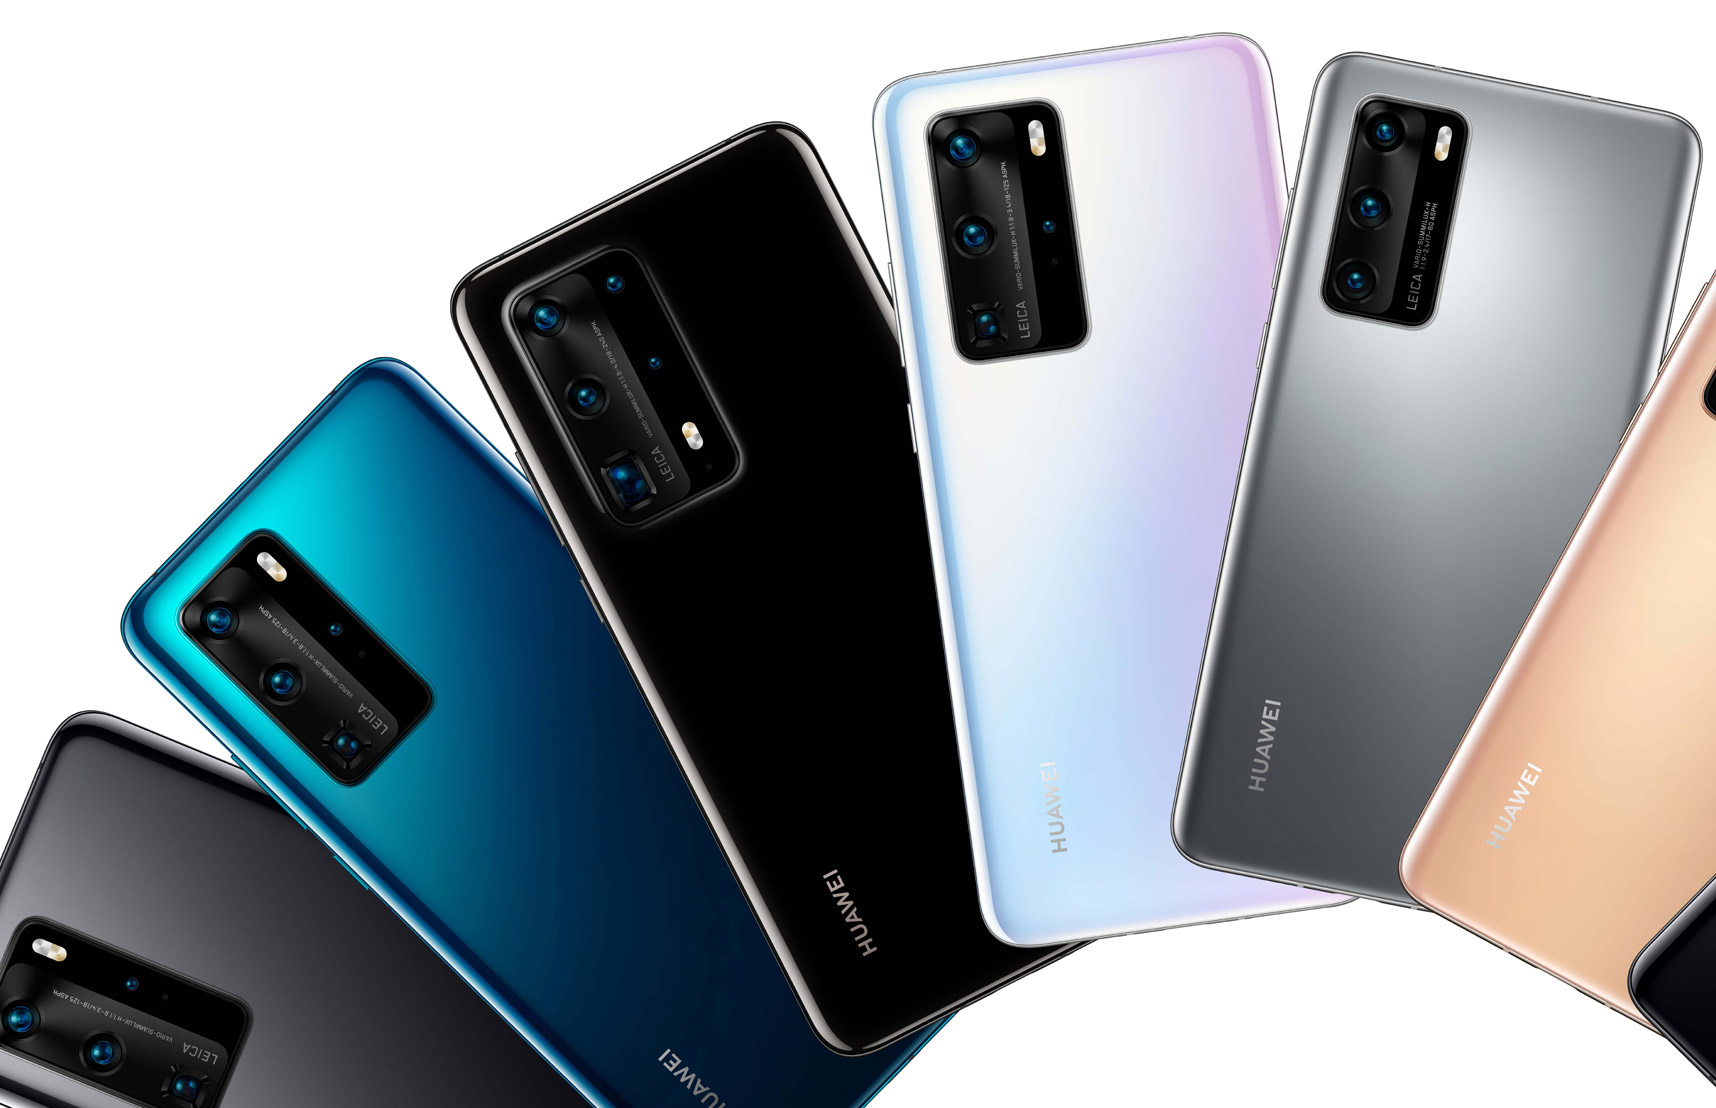 Here are the colour options for the Huawei P40, P40 Pro and P40 ...